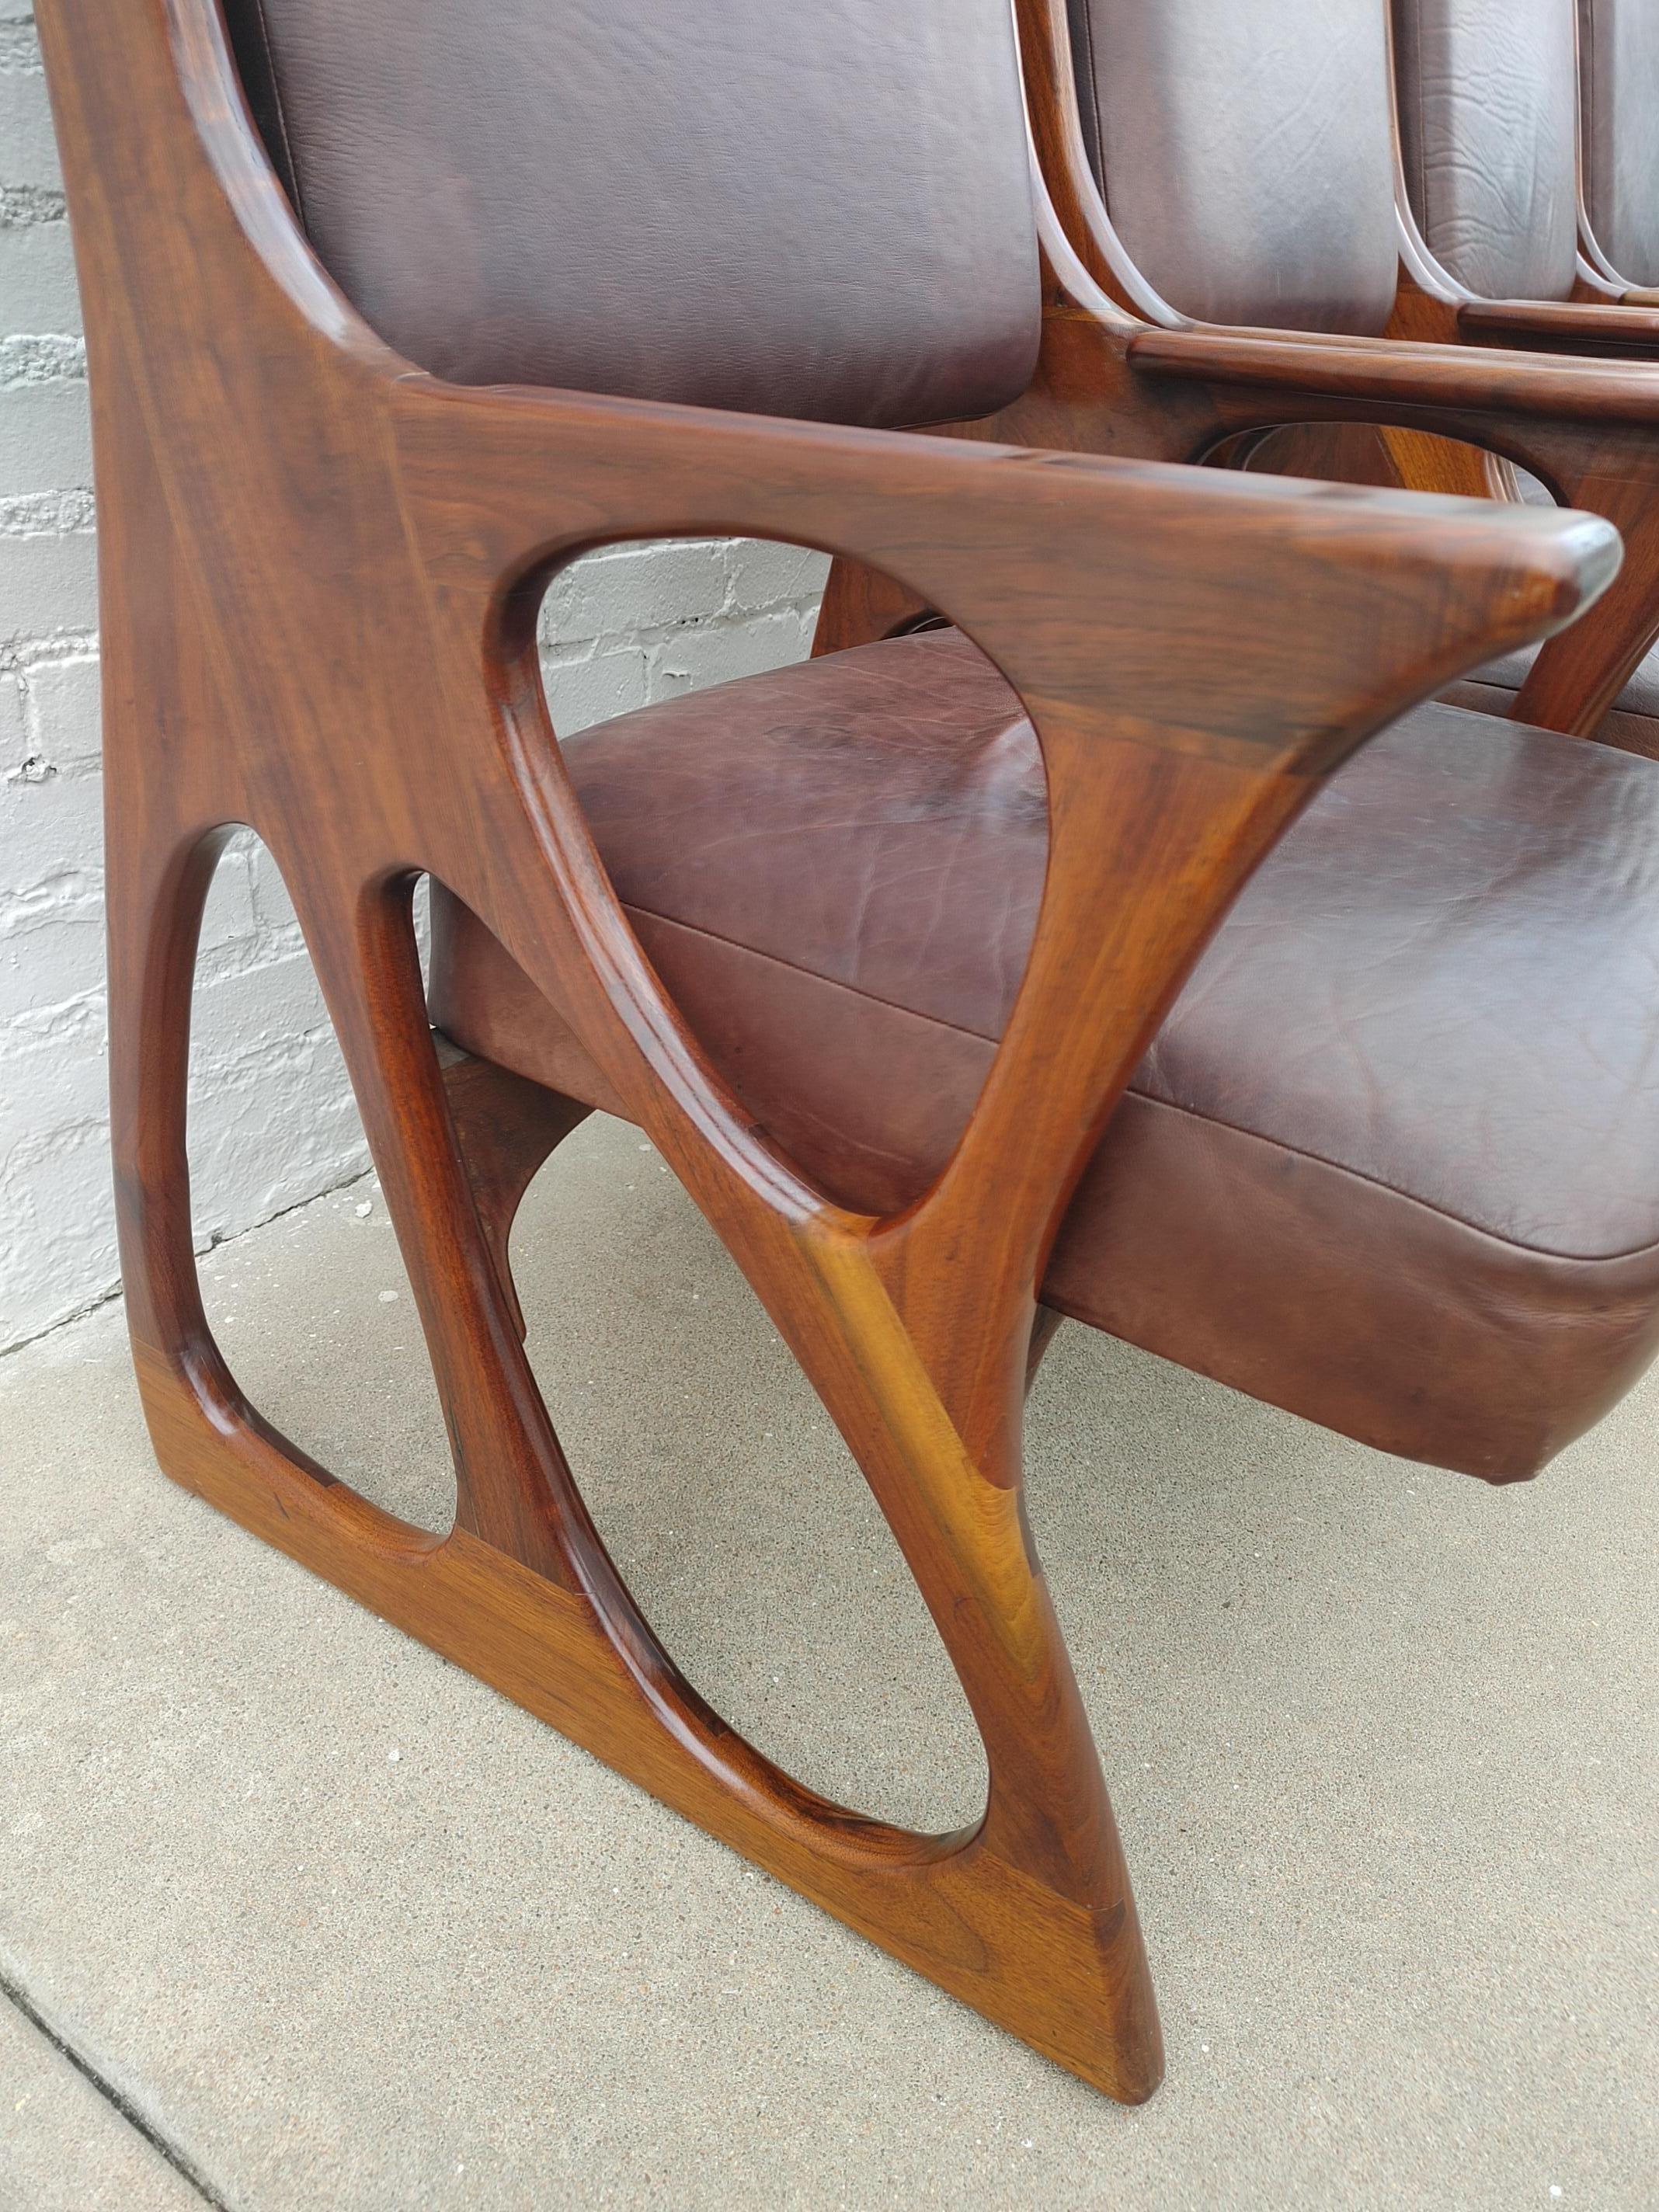 Beautifully crafted solid walnut American Studio Movement style dining chairs.  Very sculpturally unique and structurally sound seating.  Some expected wear on the leather seats with little wear on the walnut frames.  These would be rated above